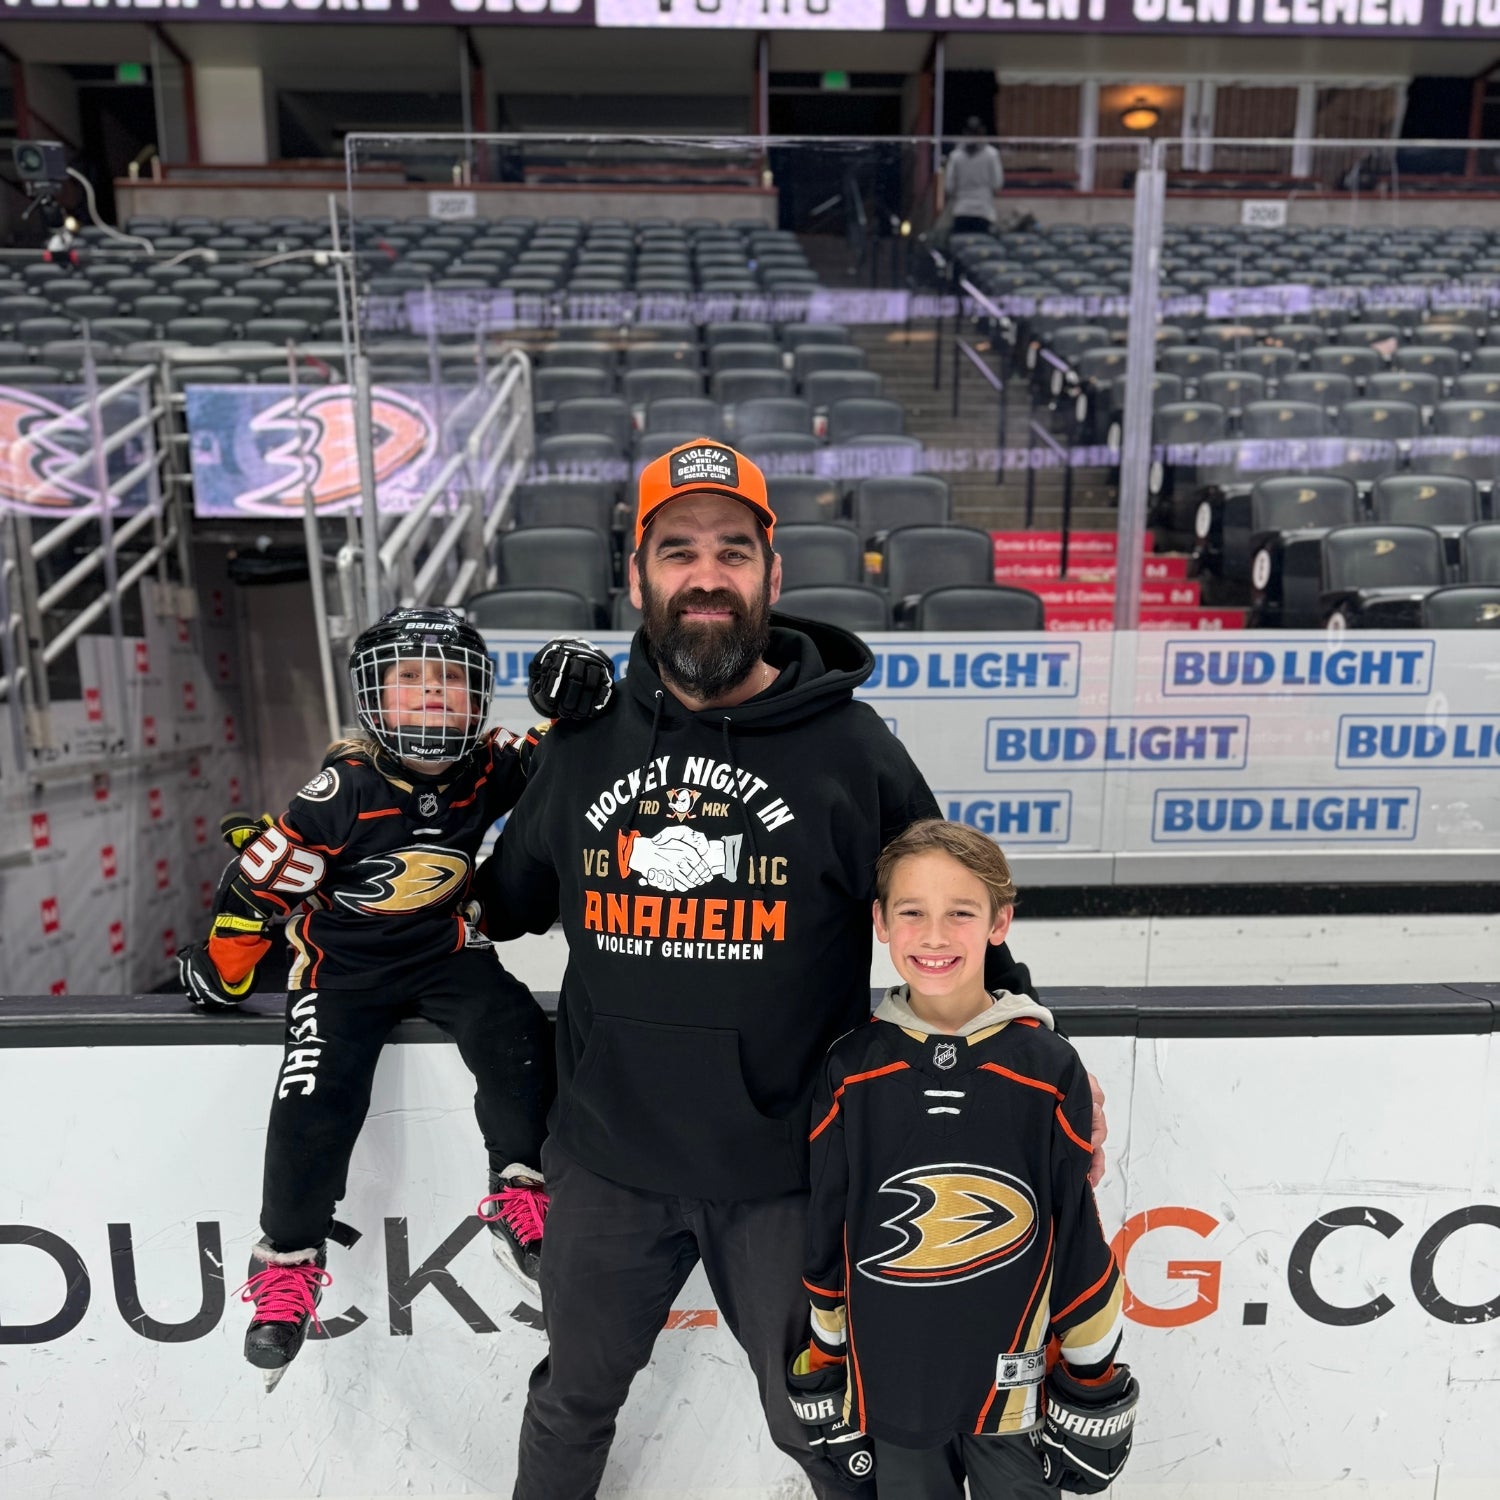 Violent Gentlemen Hockey Night in Anaheim at the Anaheim ducks game. Violent gentlemen is a hockey clothing company started in Anaheim, CA and frequents ducks home games.